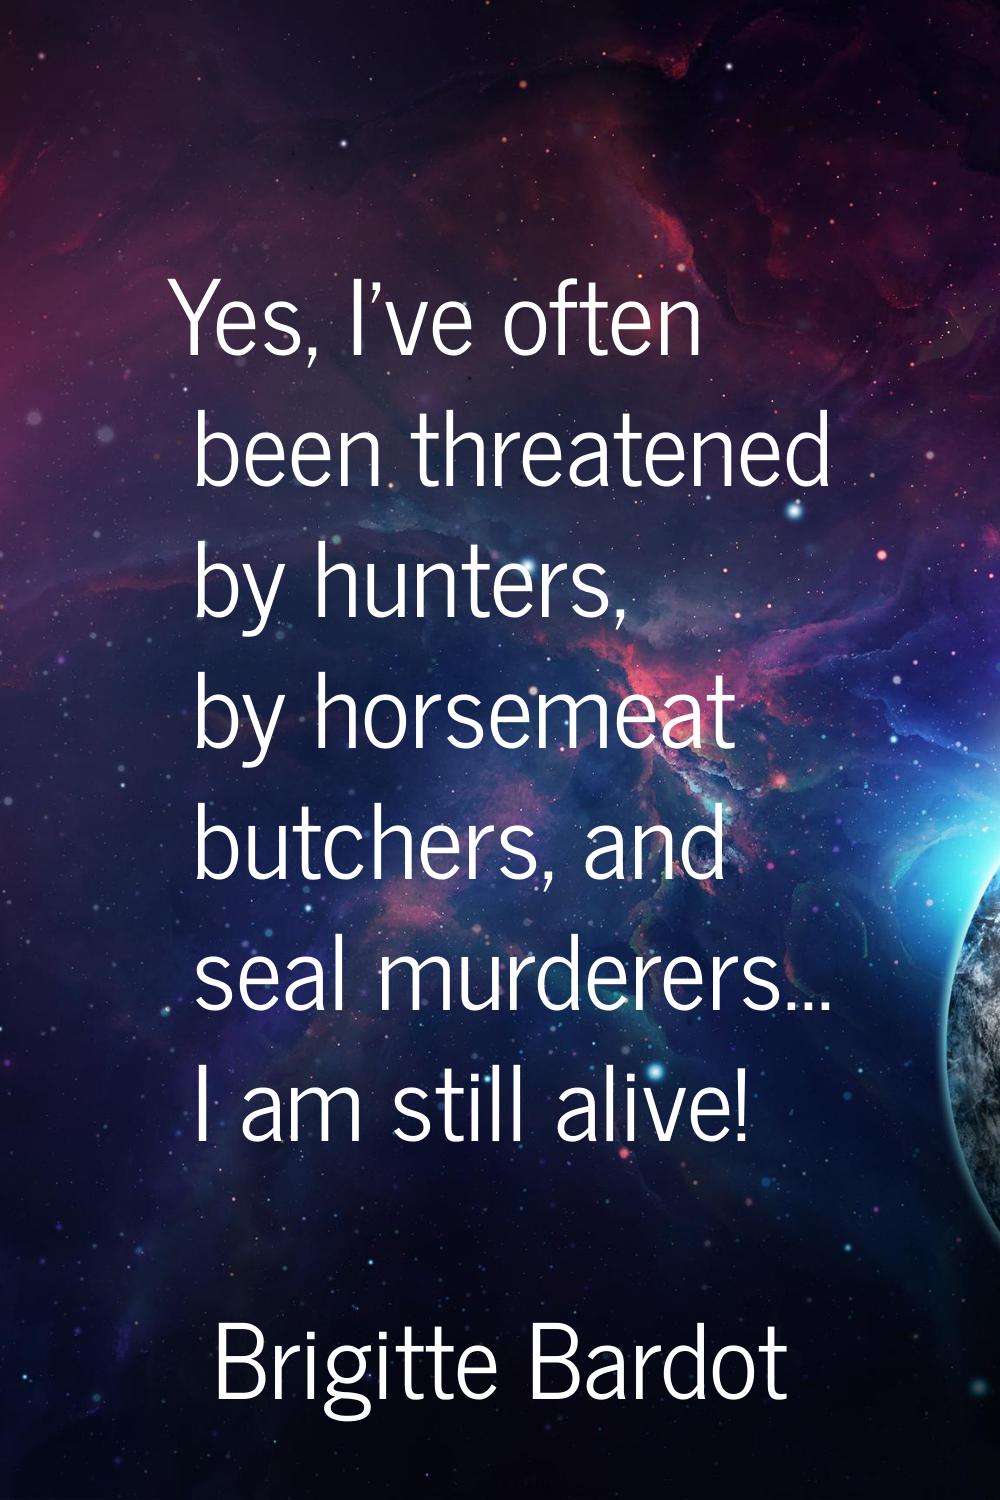 Yes, I've often been threatened by hunters, by horsemeat butchers, and seal murderers... I am still